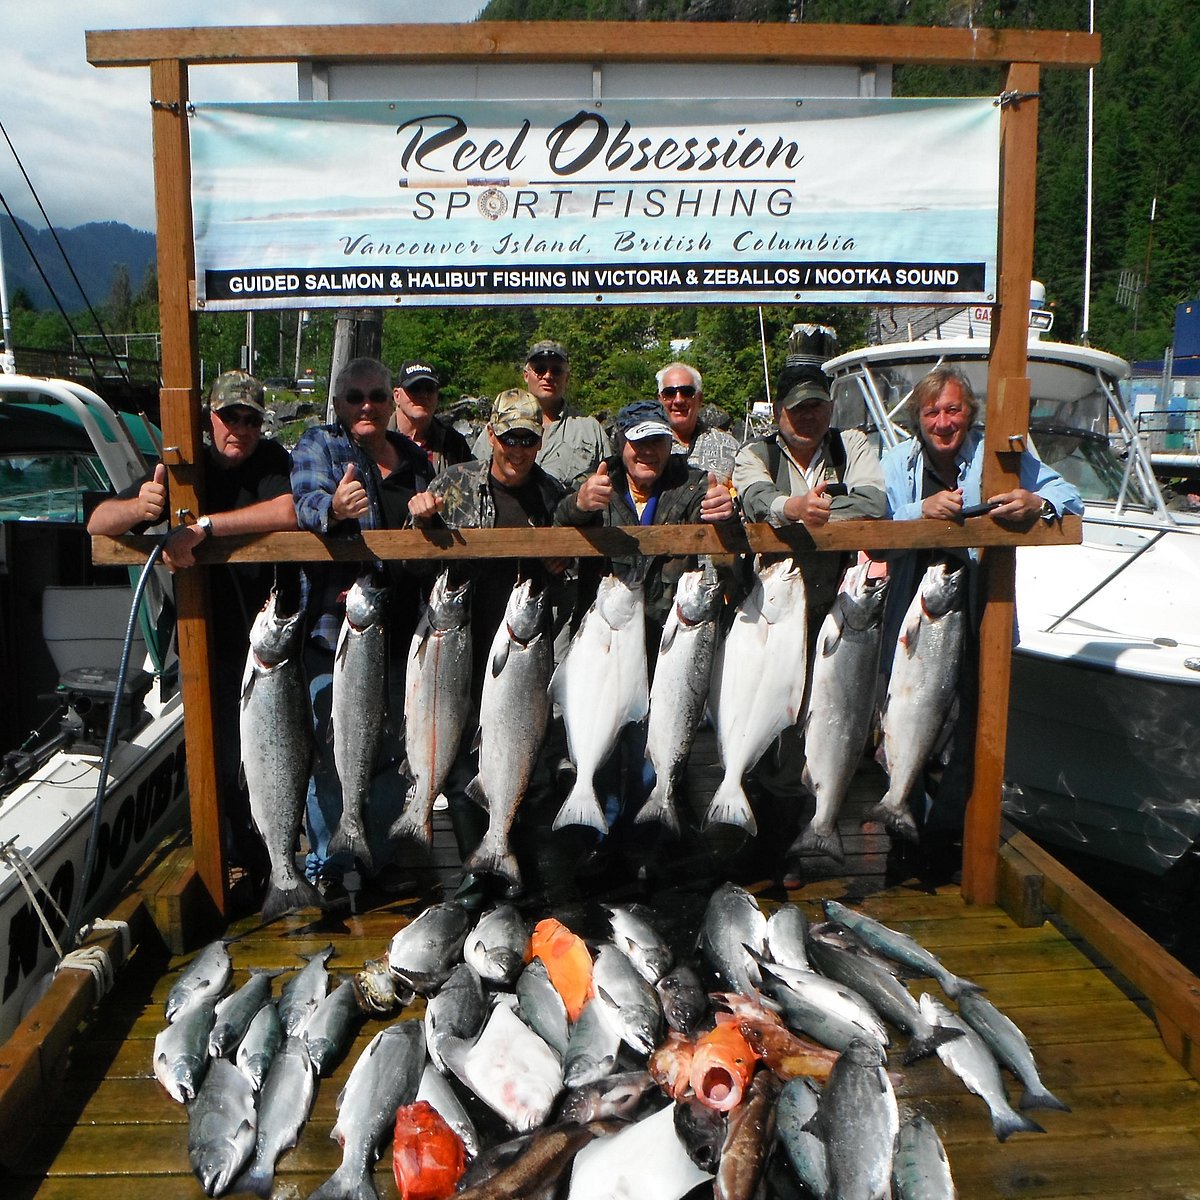 Reel Obsession Fishing Lodge Vancouver Island - All You Need to